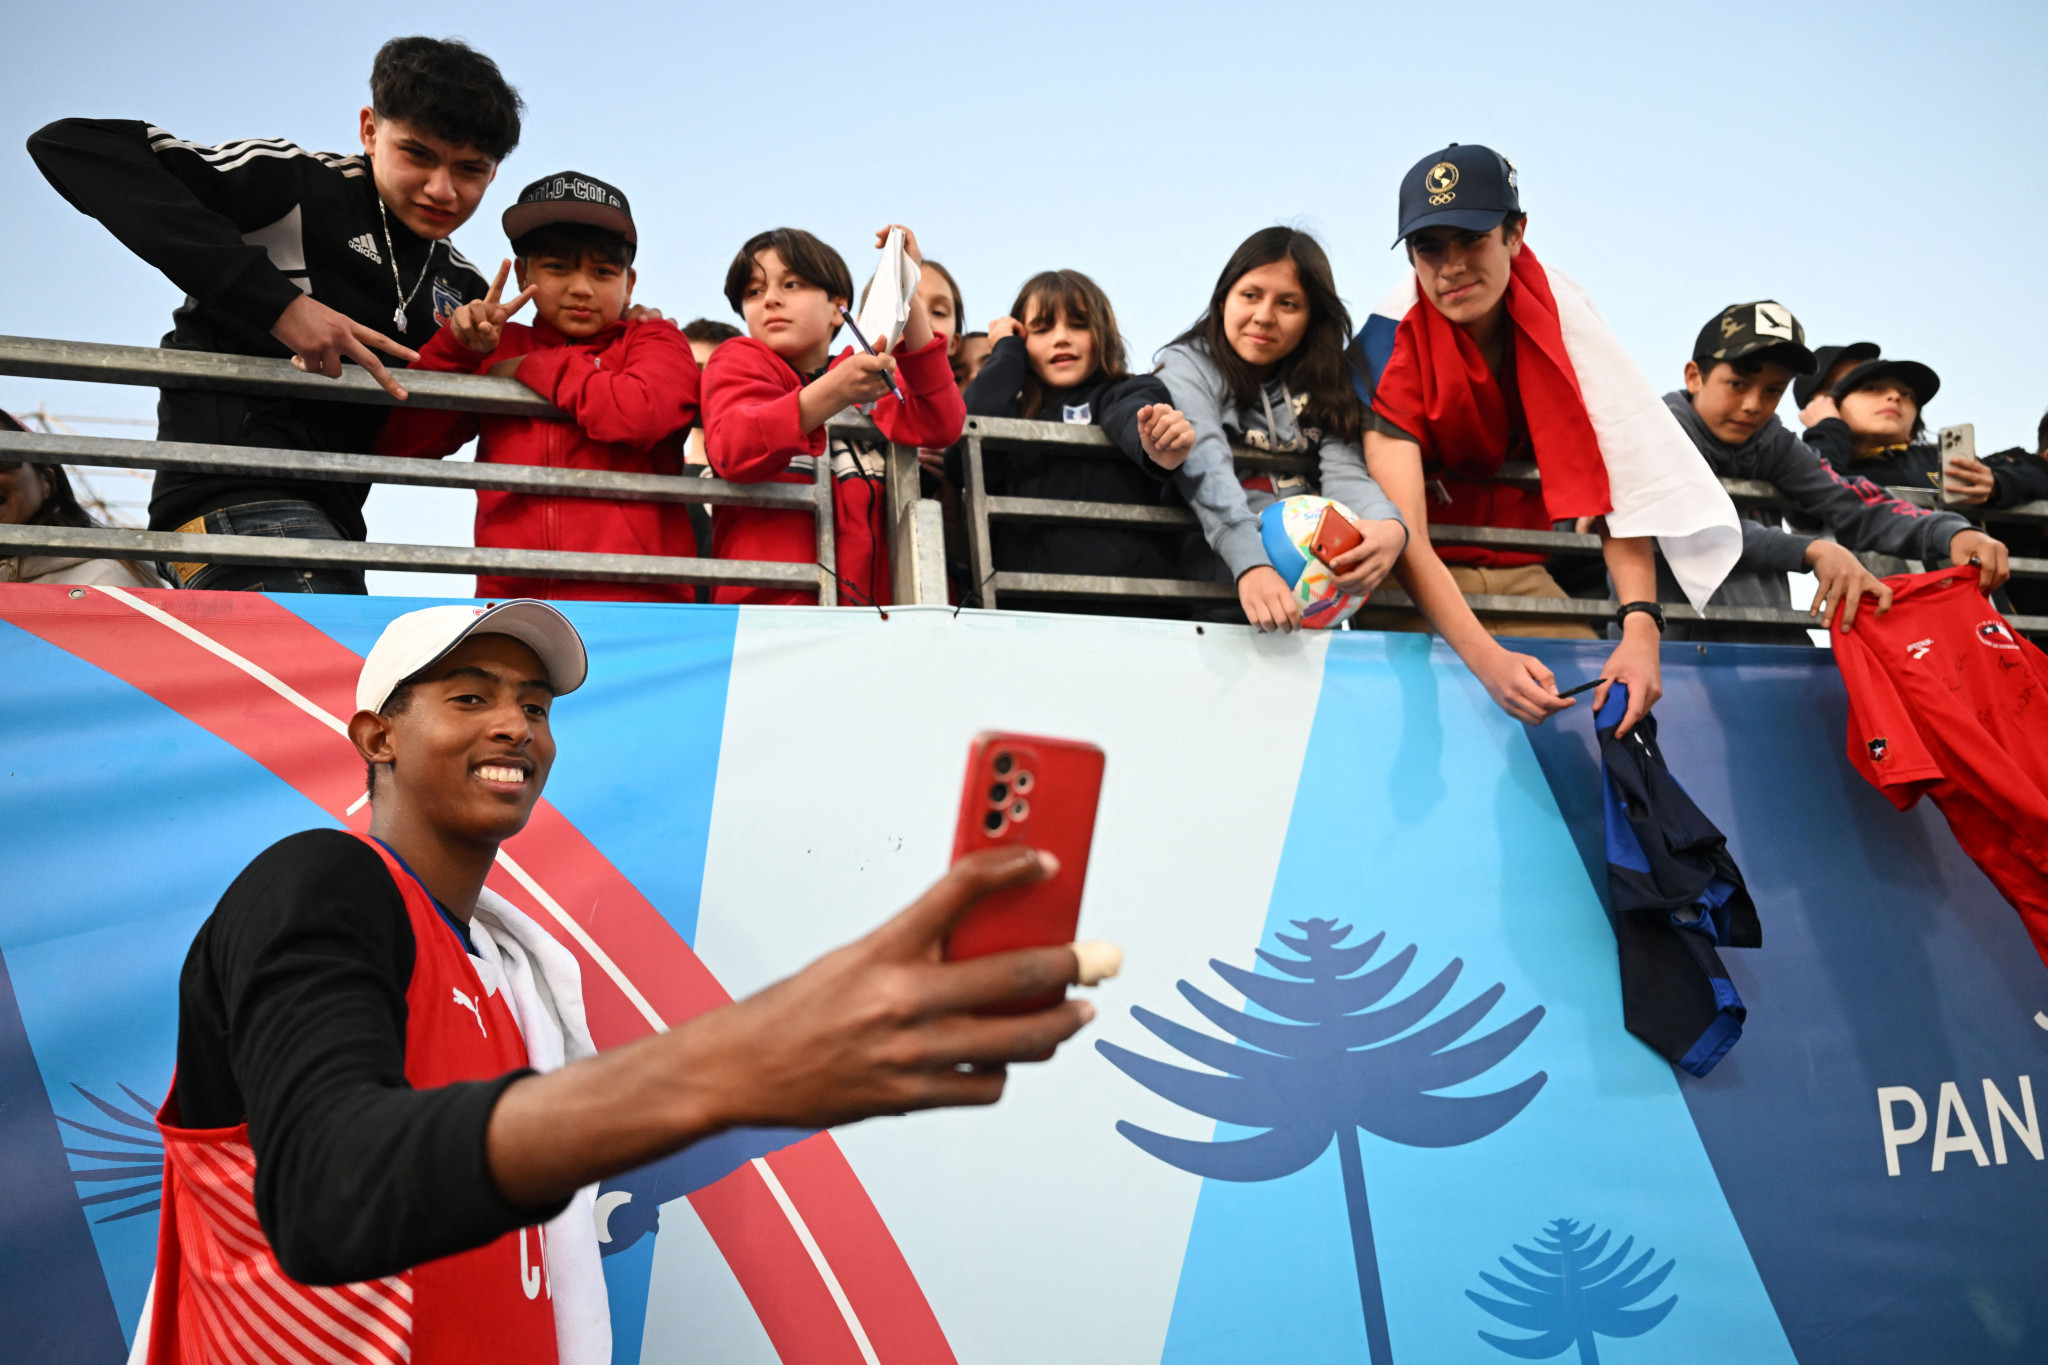 Cuba's beach volleyball player Noslen Diaz stops for a selfie with supporters ©Getty Images